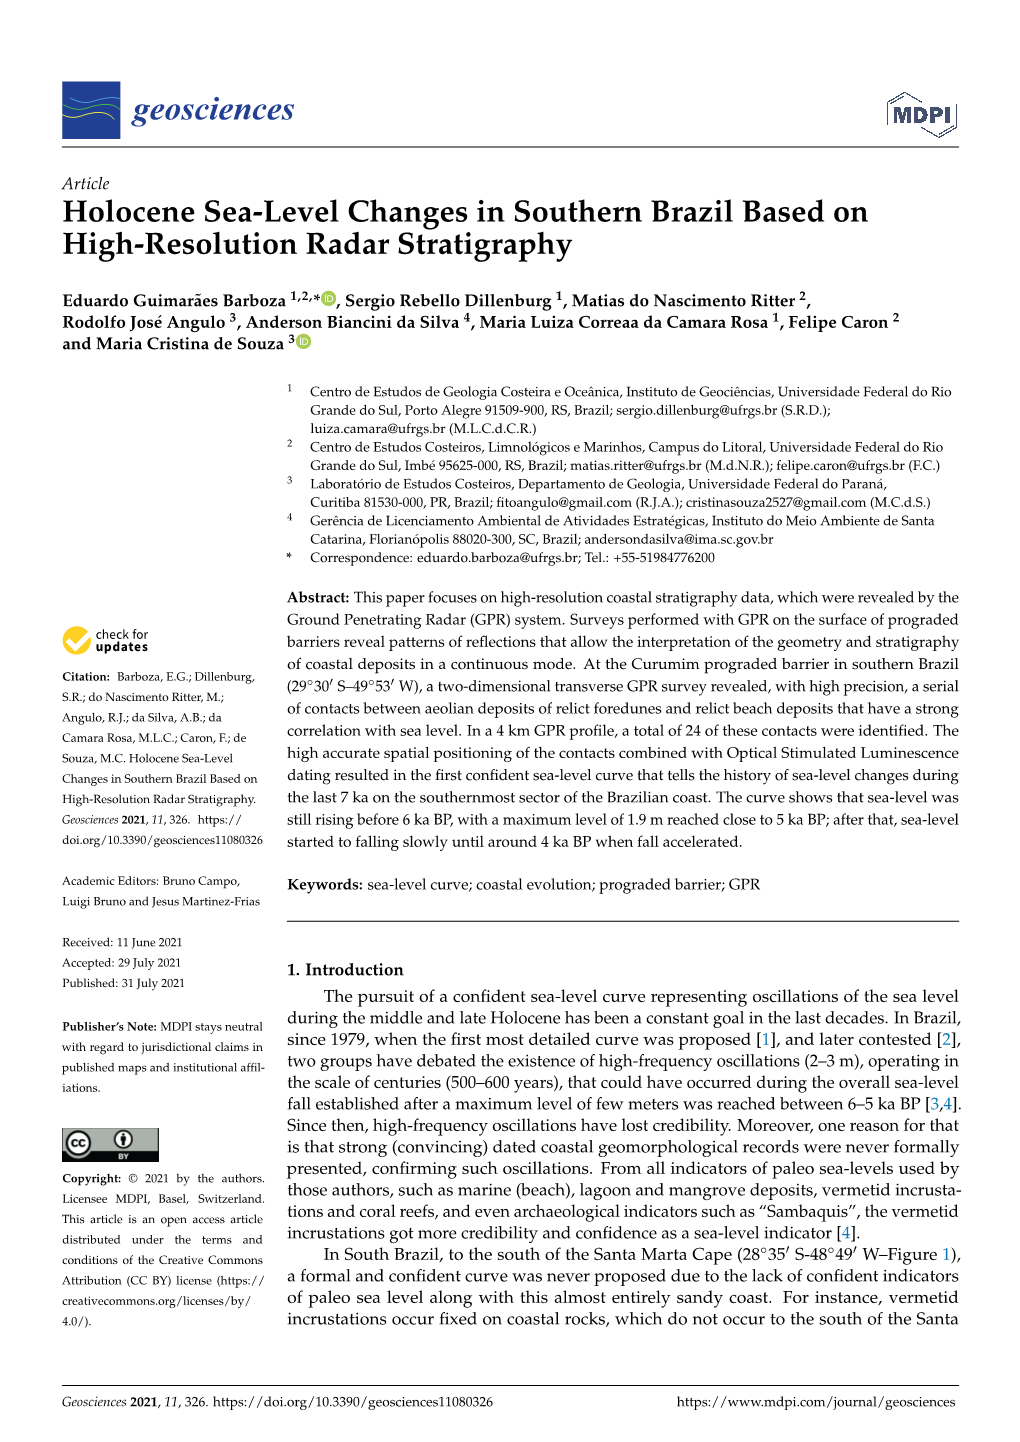 Holocene Sea-Level Changes in Southern Brazil Based on High-Resolution Radar Stratigraphy